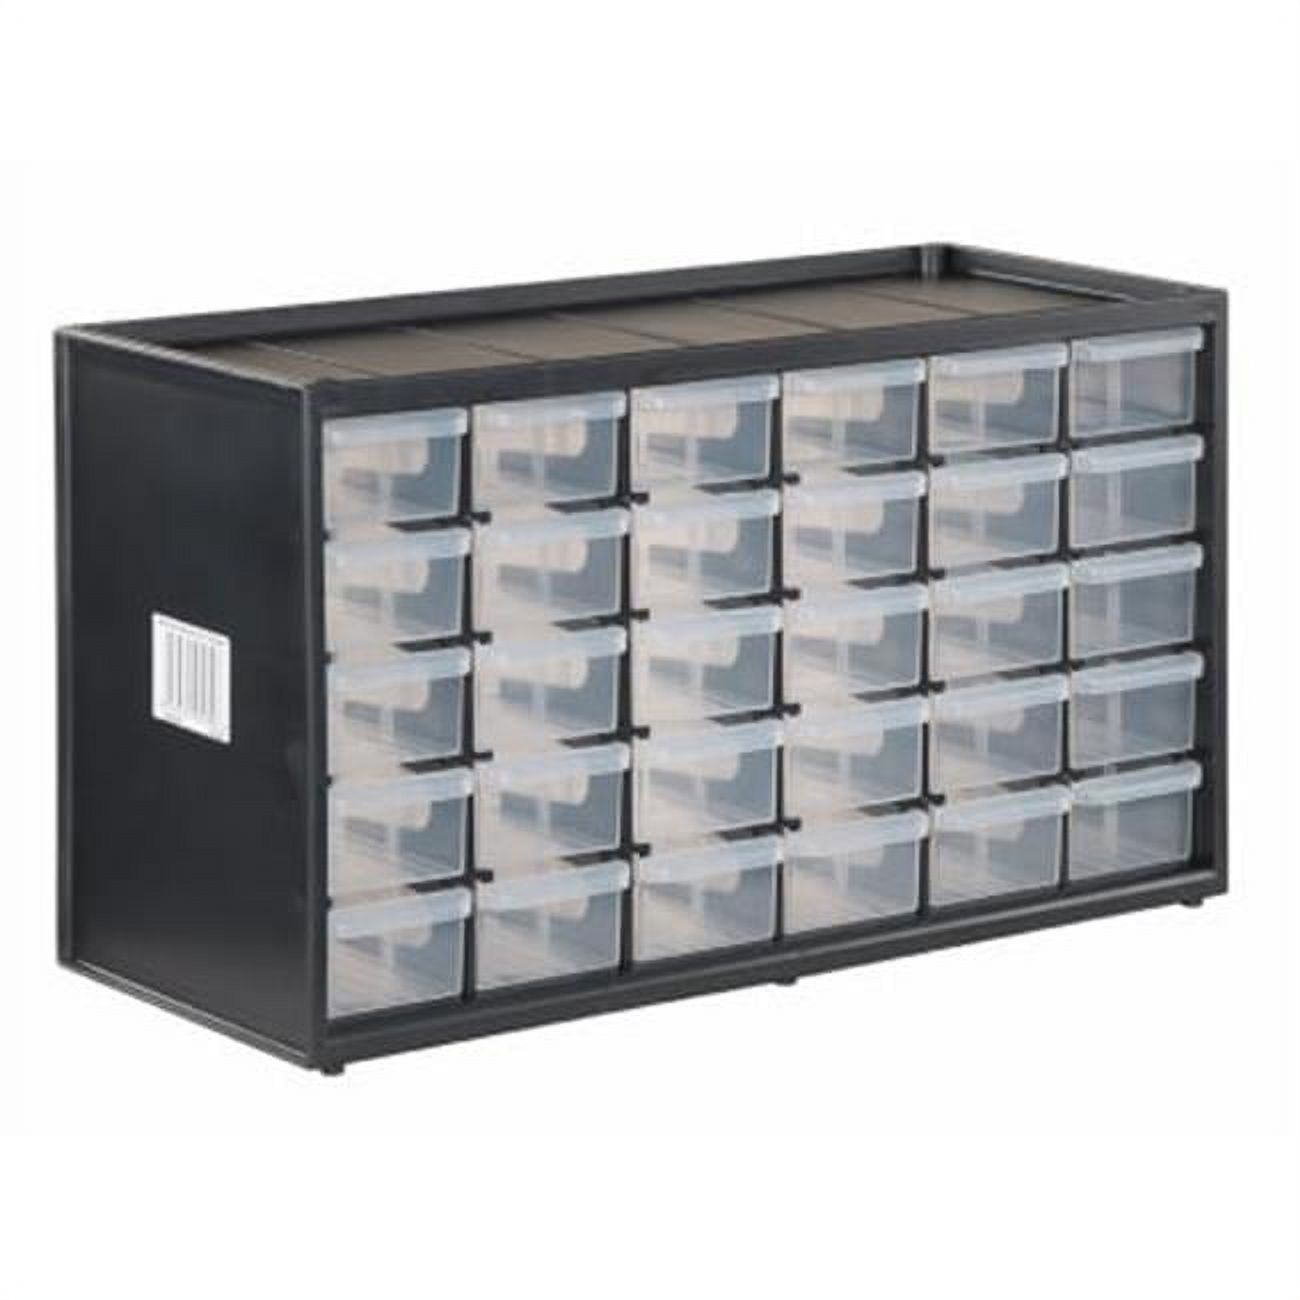 Stanley Consumer Tools 240434 30 Drawer Bin System - image 1 of 1